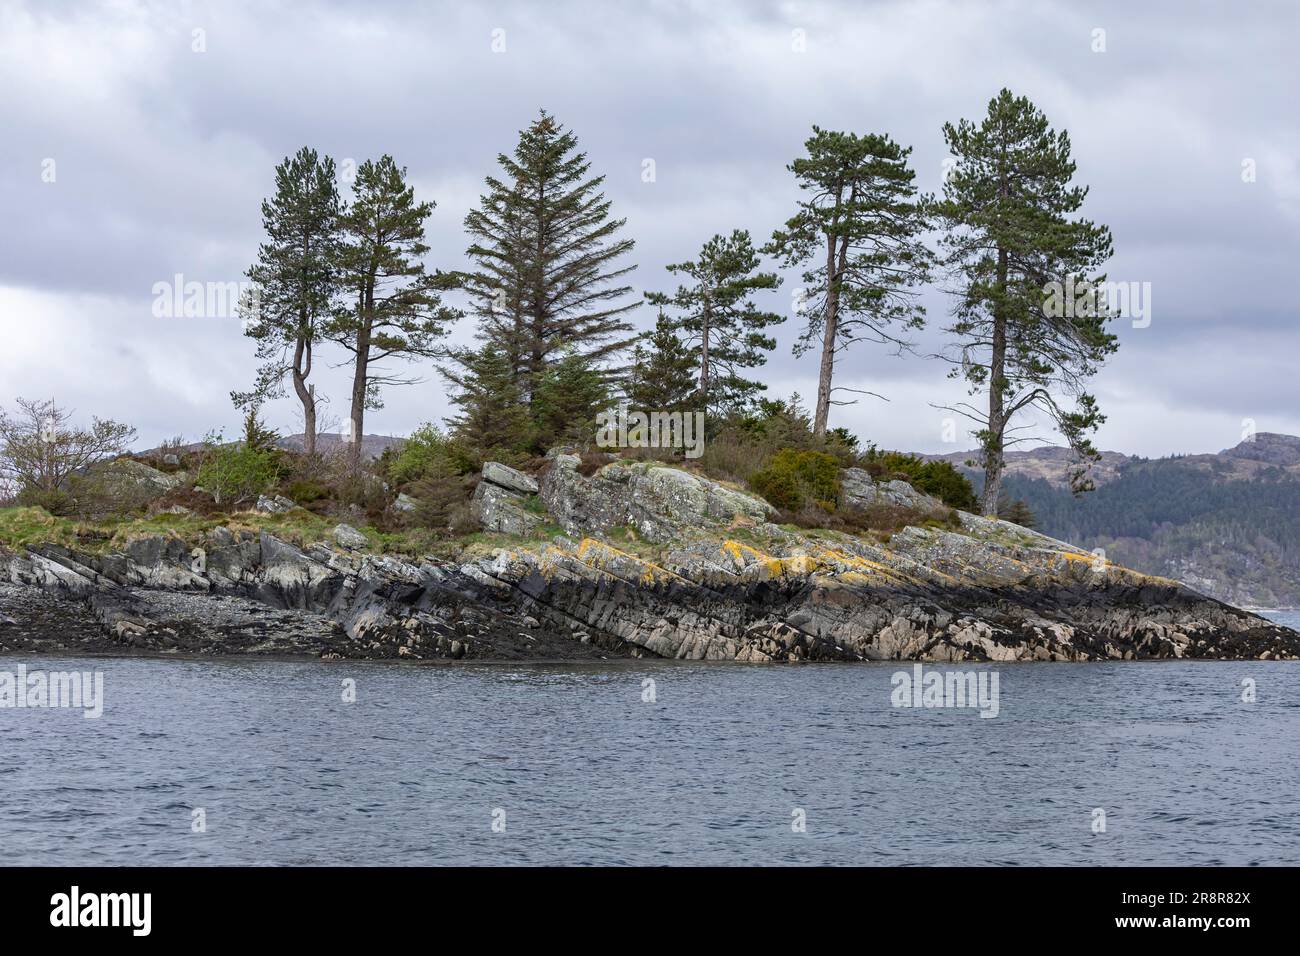 Mature green pine trees growing on a small island rocky outcrop in the middle of Loch Carron Stock Photo